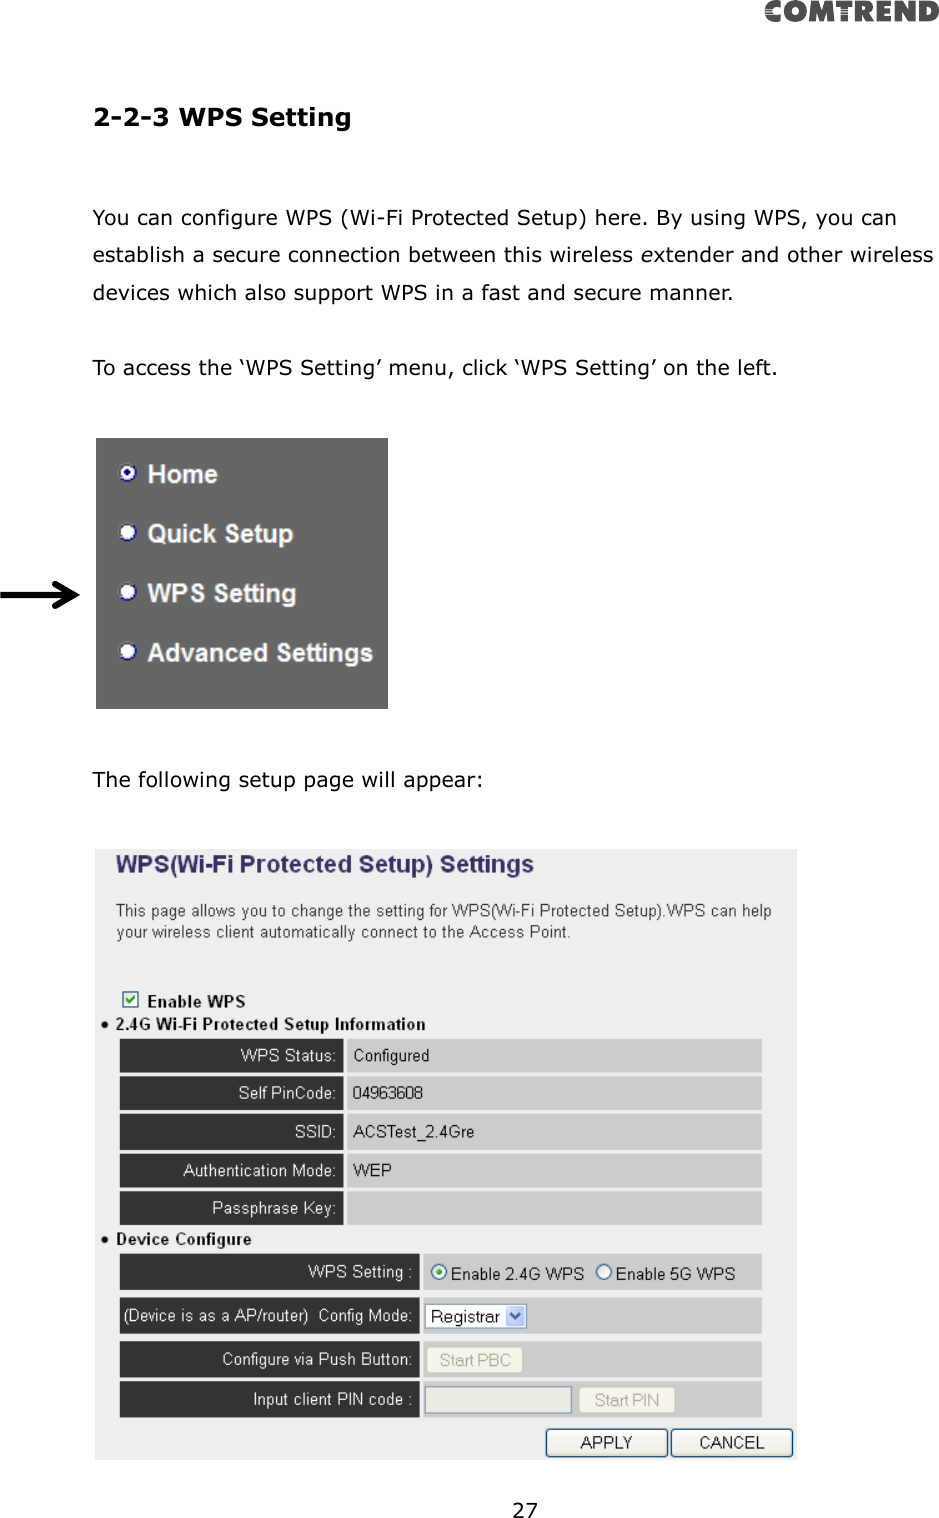       27   2-2-3 WPS Setting  You can configure WPS (Wi-Fi Protected Setup) here. By using WPS, you can establish a secure connection between this wireless extender and other wireless devices which also support WPS in a fast and secure manner.  To access the ‘WPS Setting’ menu, click ‘WPS Setting’ on the left.    The following setup page will appear:   